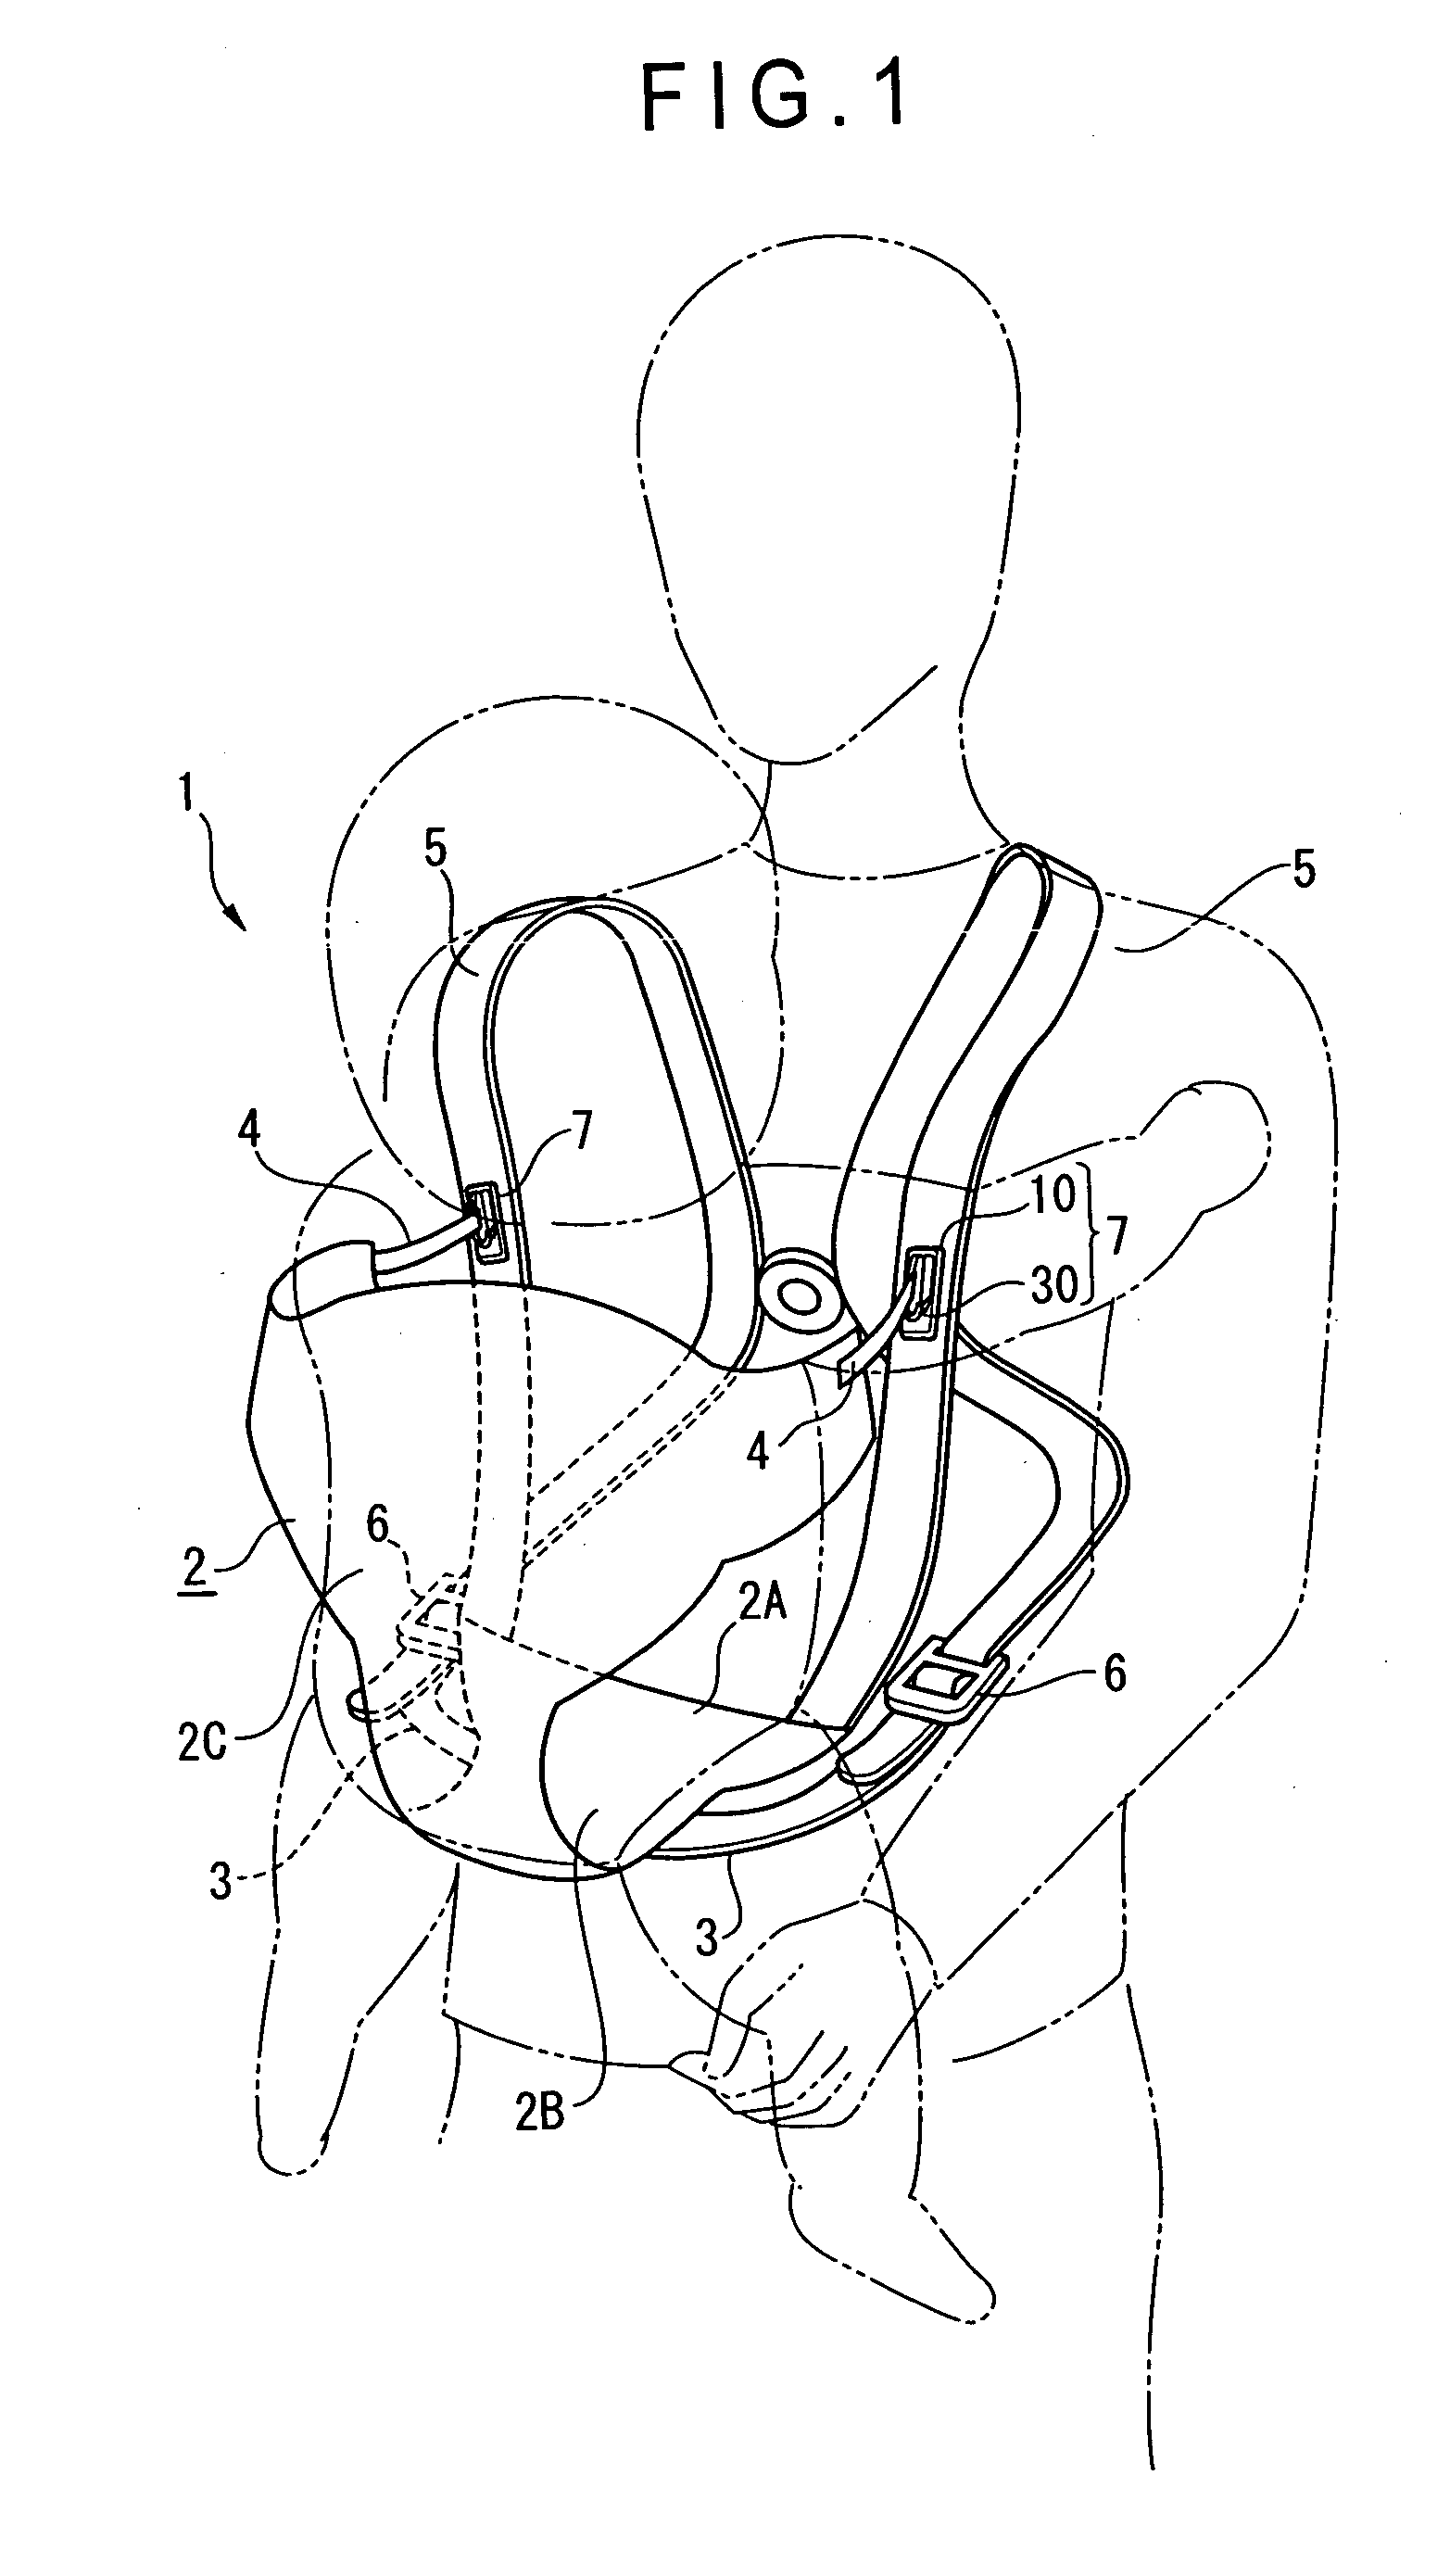 Buckle and baby carrier using the same